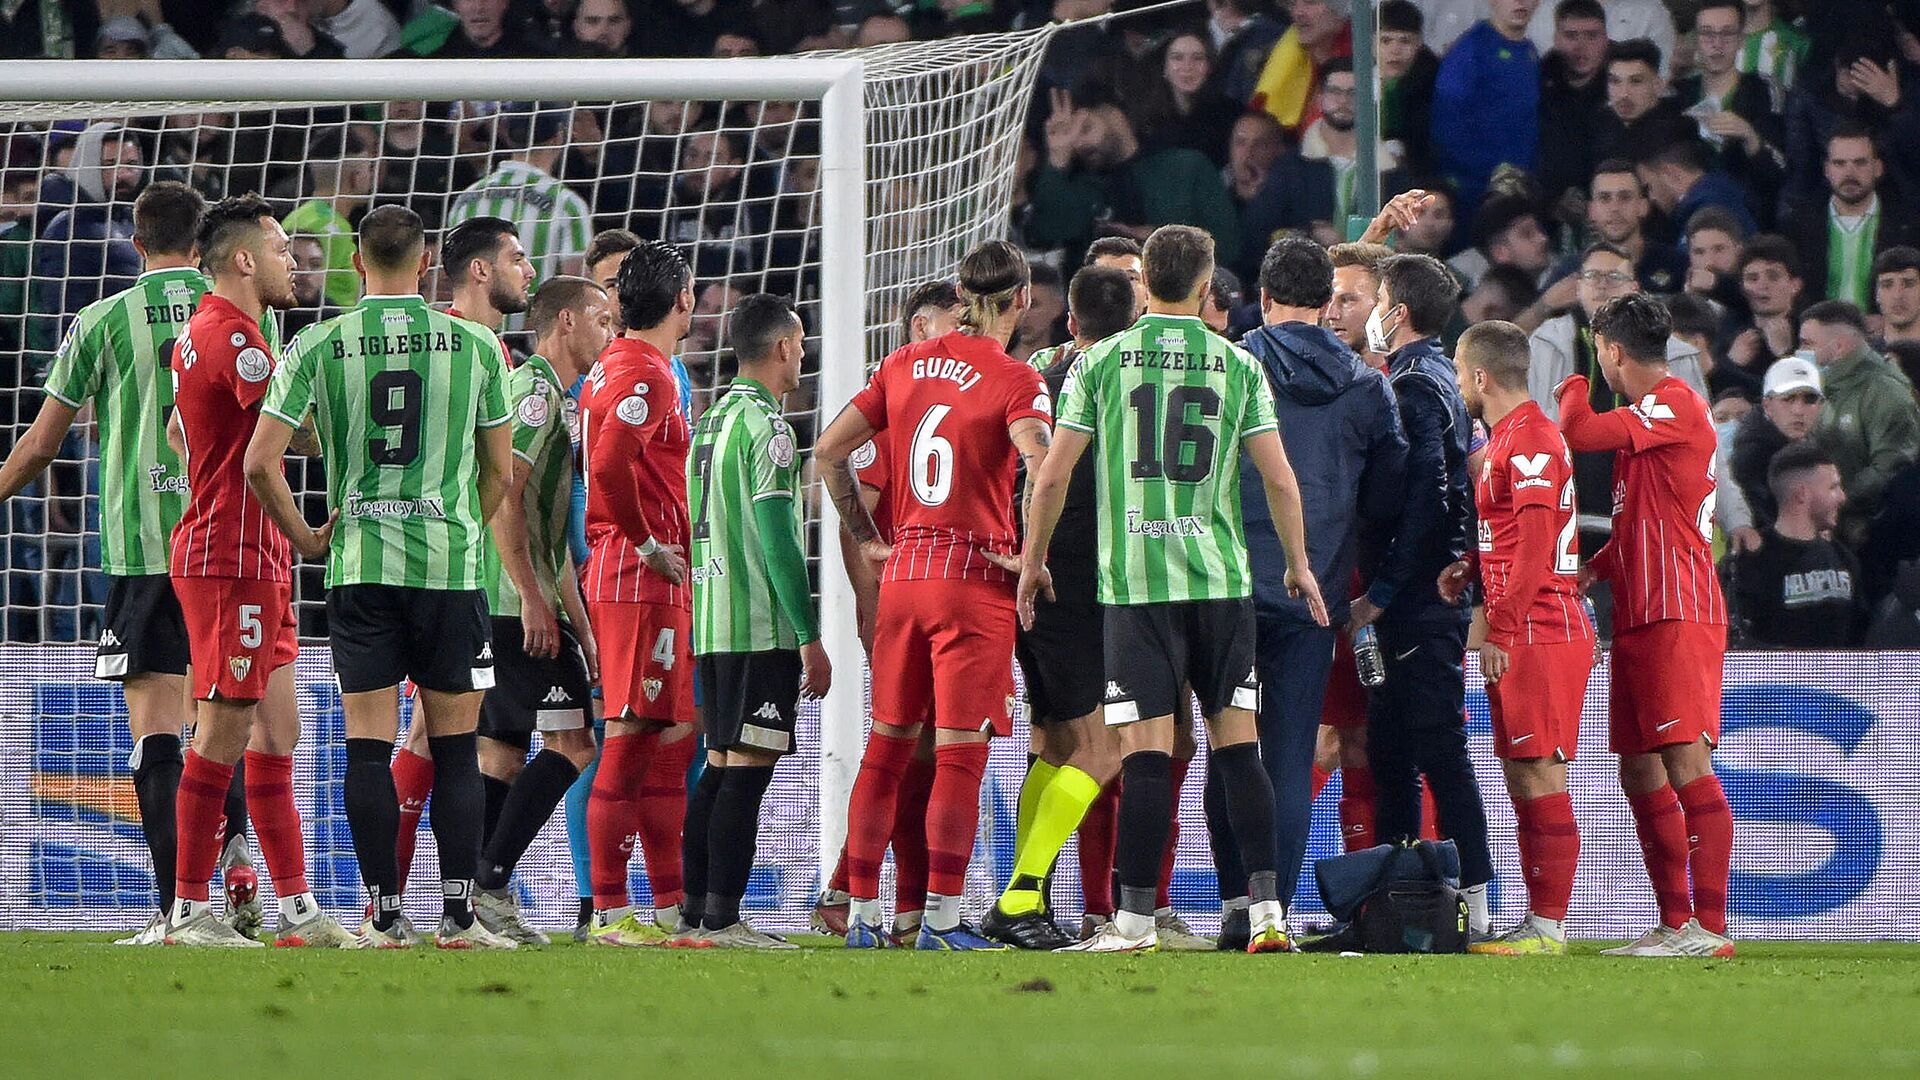 Sevilla's Spanish midfielder Joan Jordan Moreno (C) receives assistance after being hit by an object thrown from the tribunes during the Spanish Copa del Rey (King's Cup) round of 16 first leg football match between Real Betis and Sevilla FC at the Benito Villamarin stadium in Seville on January 15, 2022. - The Copa del Rey match between rivals Sevilla and Real Betis was stopped after Sevilla's Joan Jordan was struck on the head by an object thrown from the crowd. (Photo by CRISTINA QUICLER  - РИА Новости, 1920, 16.01.2022